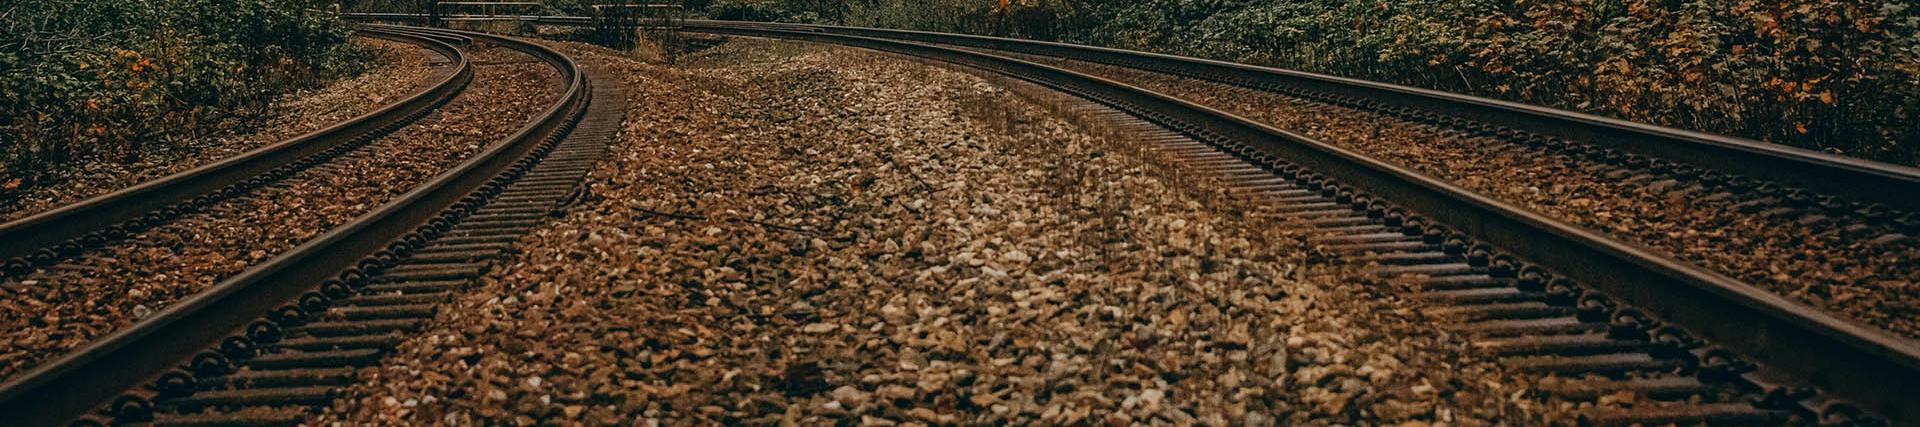 two railway lines - image focuses on the track ballast